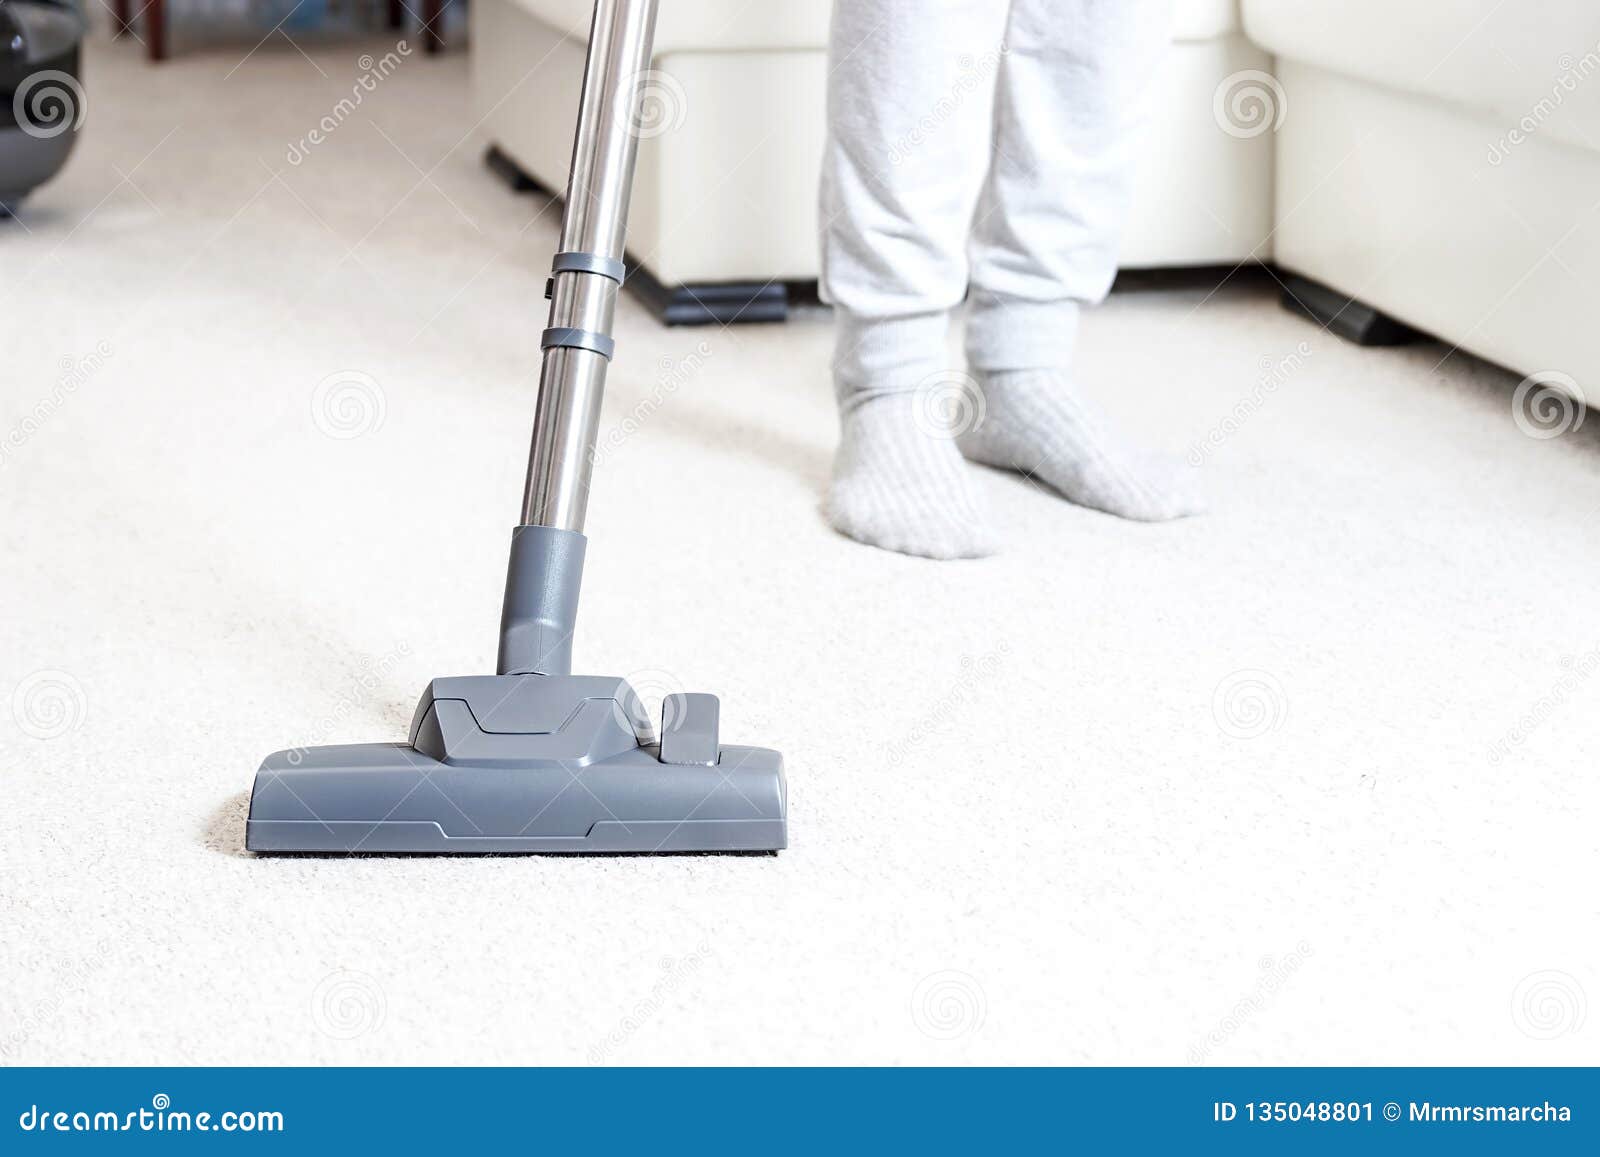 Apartment carpet cleaning cost information